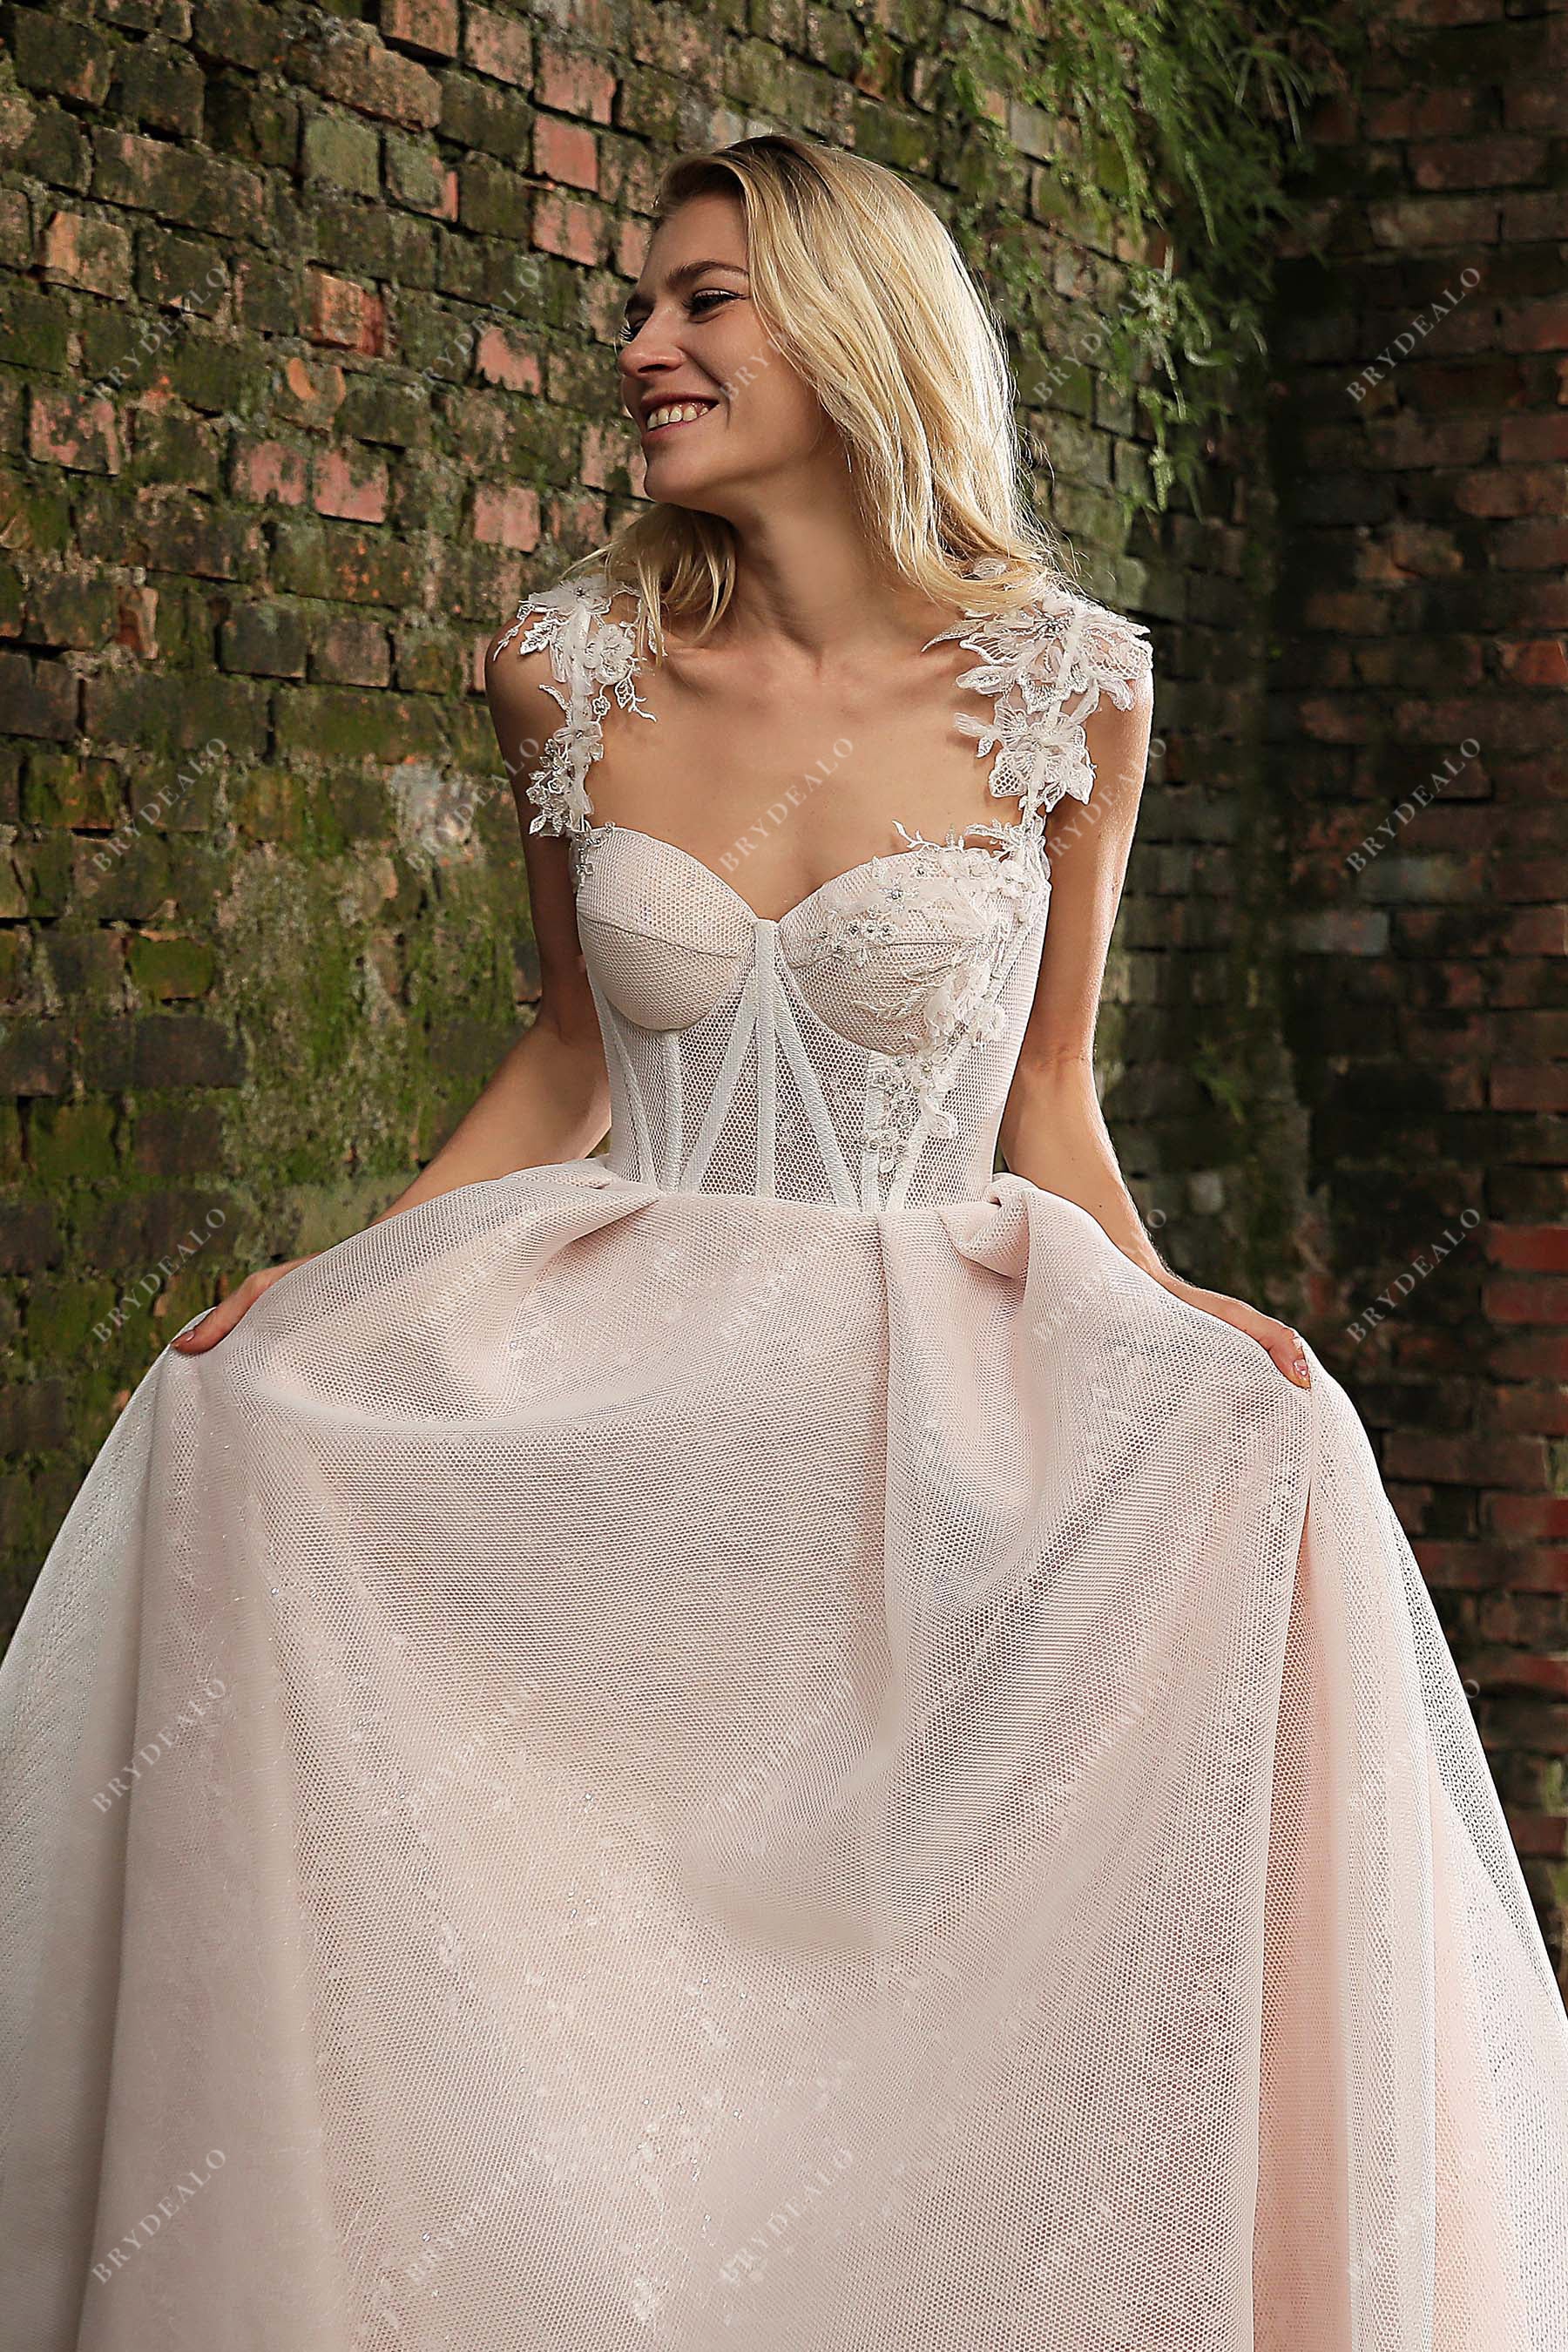 Designer Dusty Rose Sweetheart Corset Bridal Gown